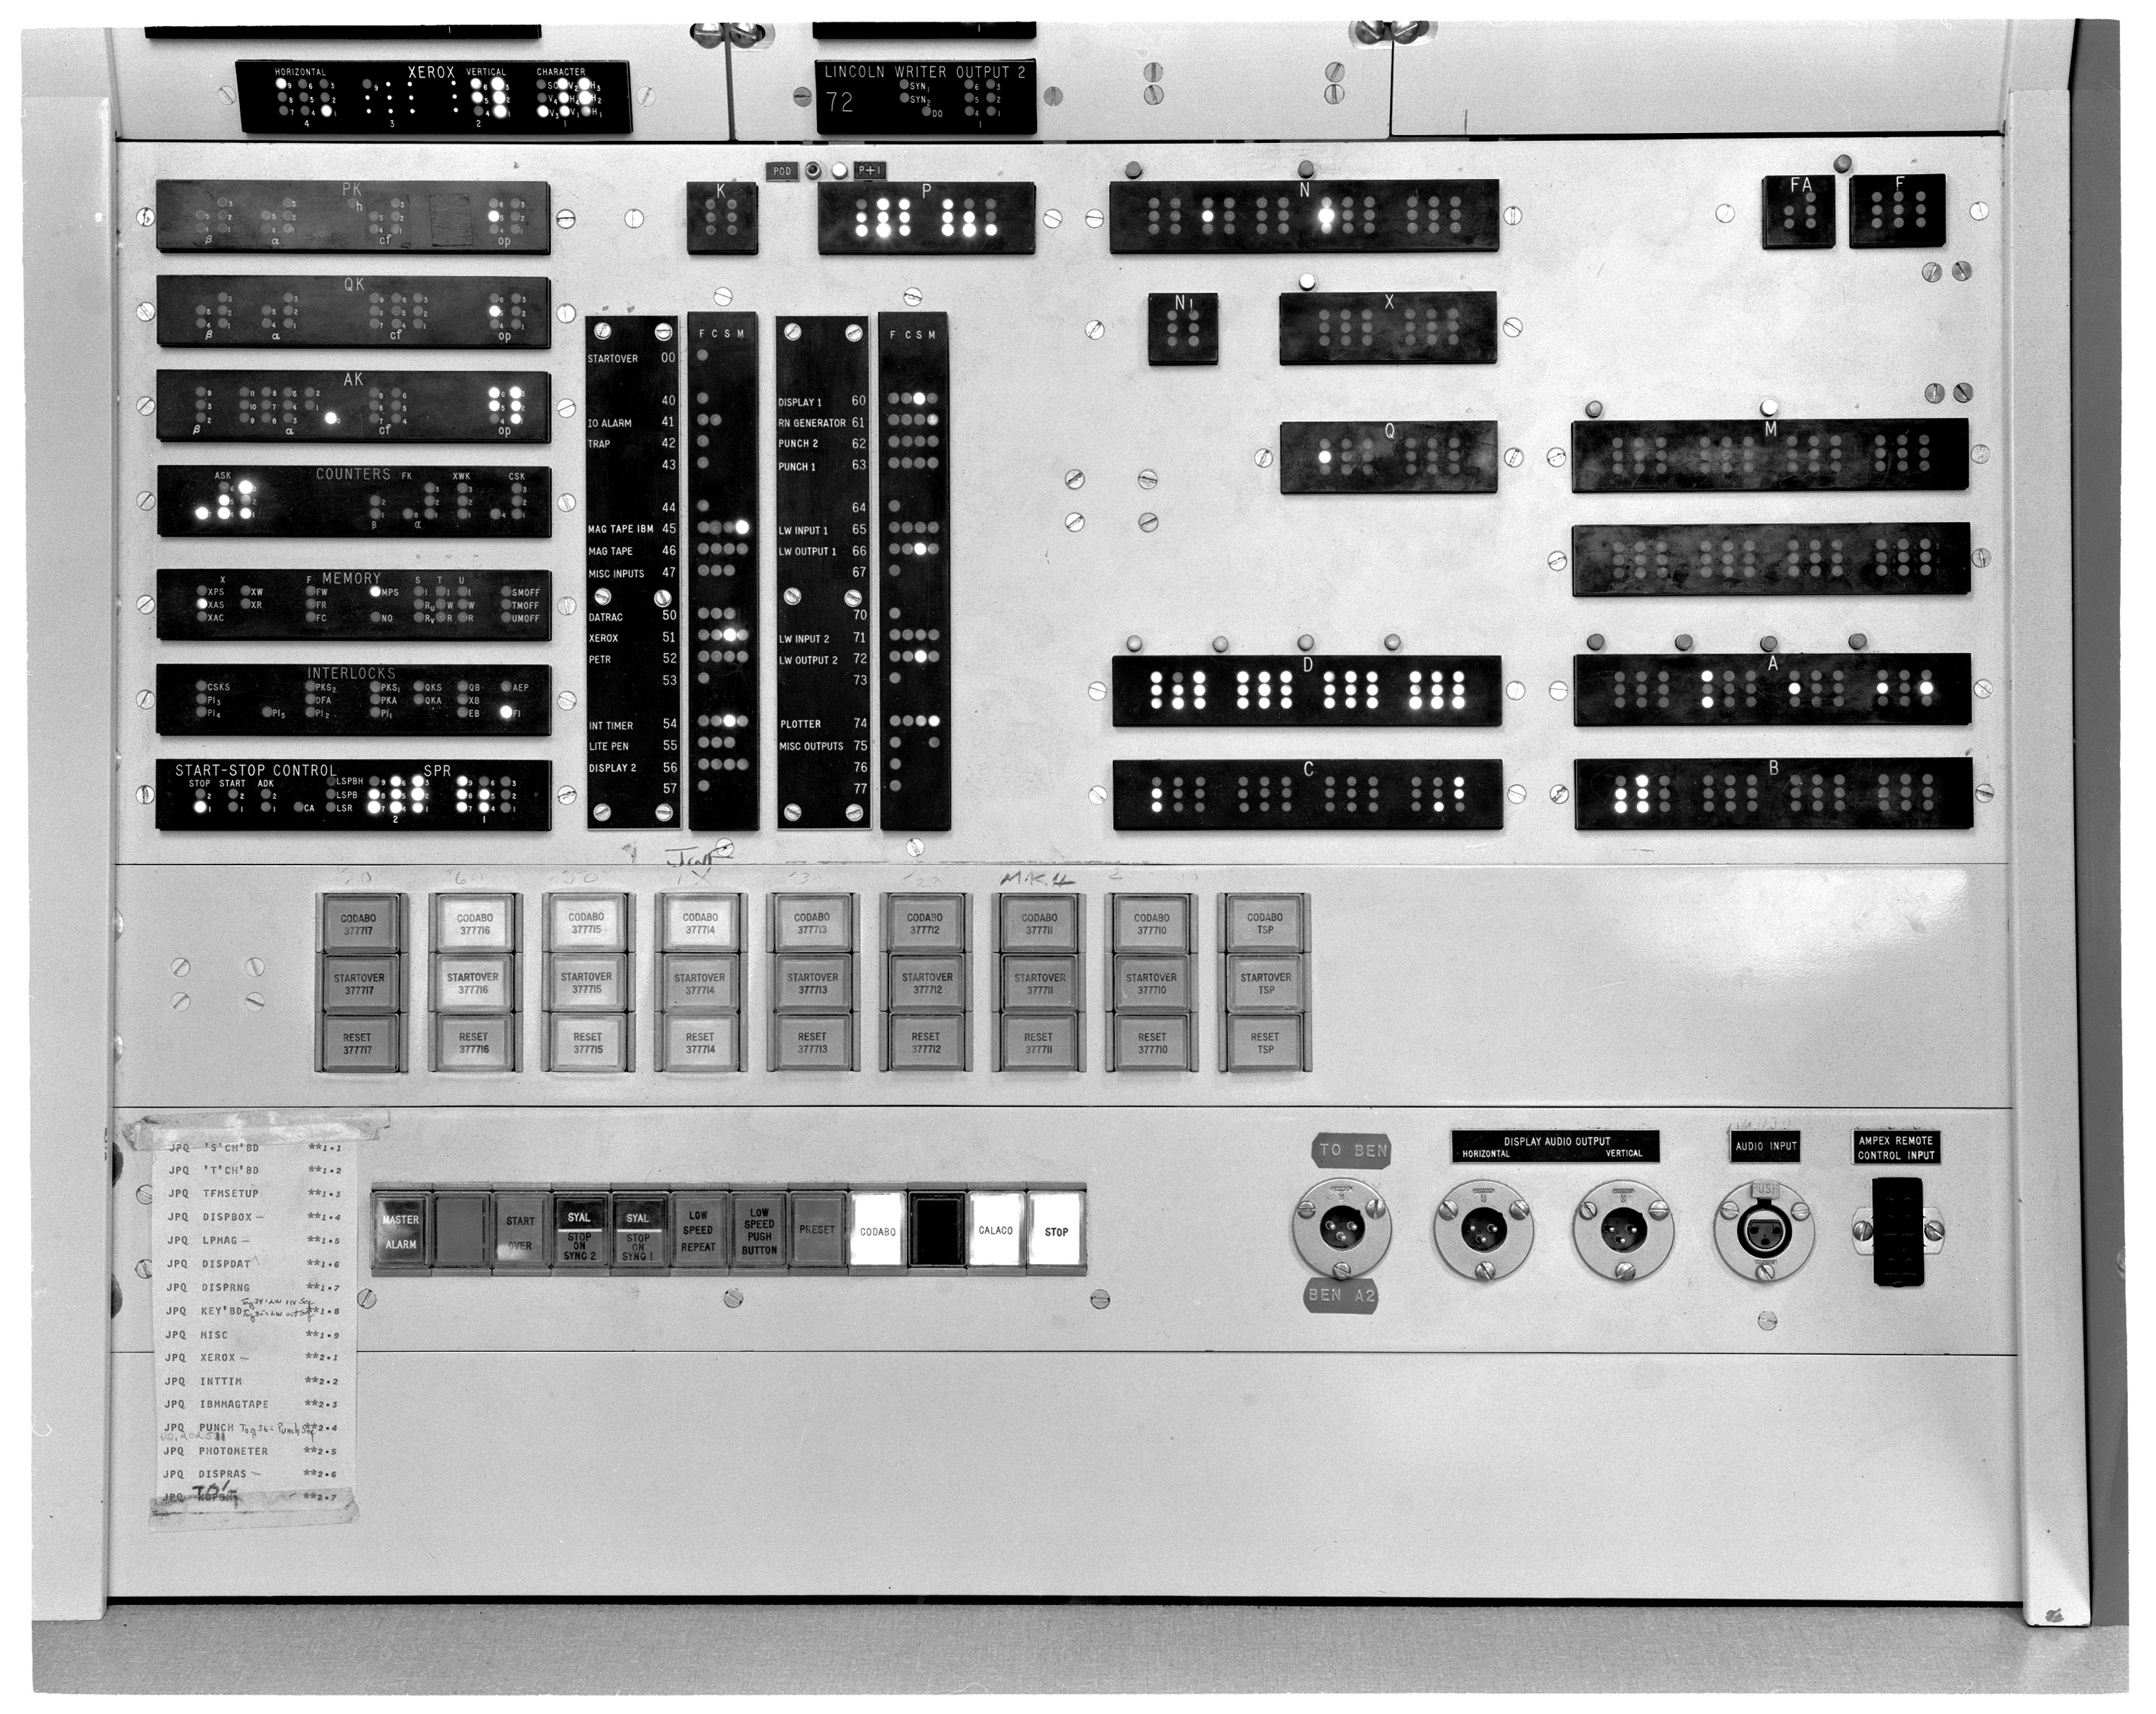 P91-214: 02/28/1963, This photo appears in: "TX-2 Users Handbook," Lincoln Manual No. 45, July, 1961, p. 5-5, Figure 5-4.: Console Indicator Panel.